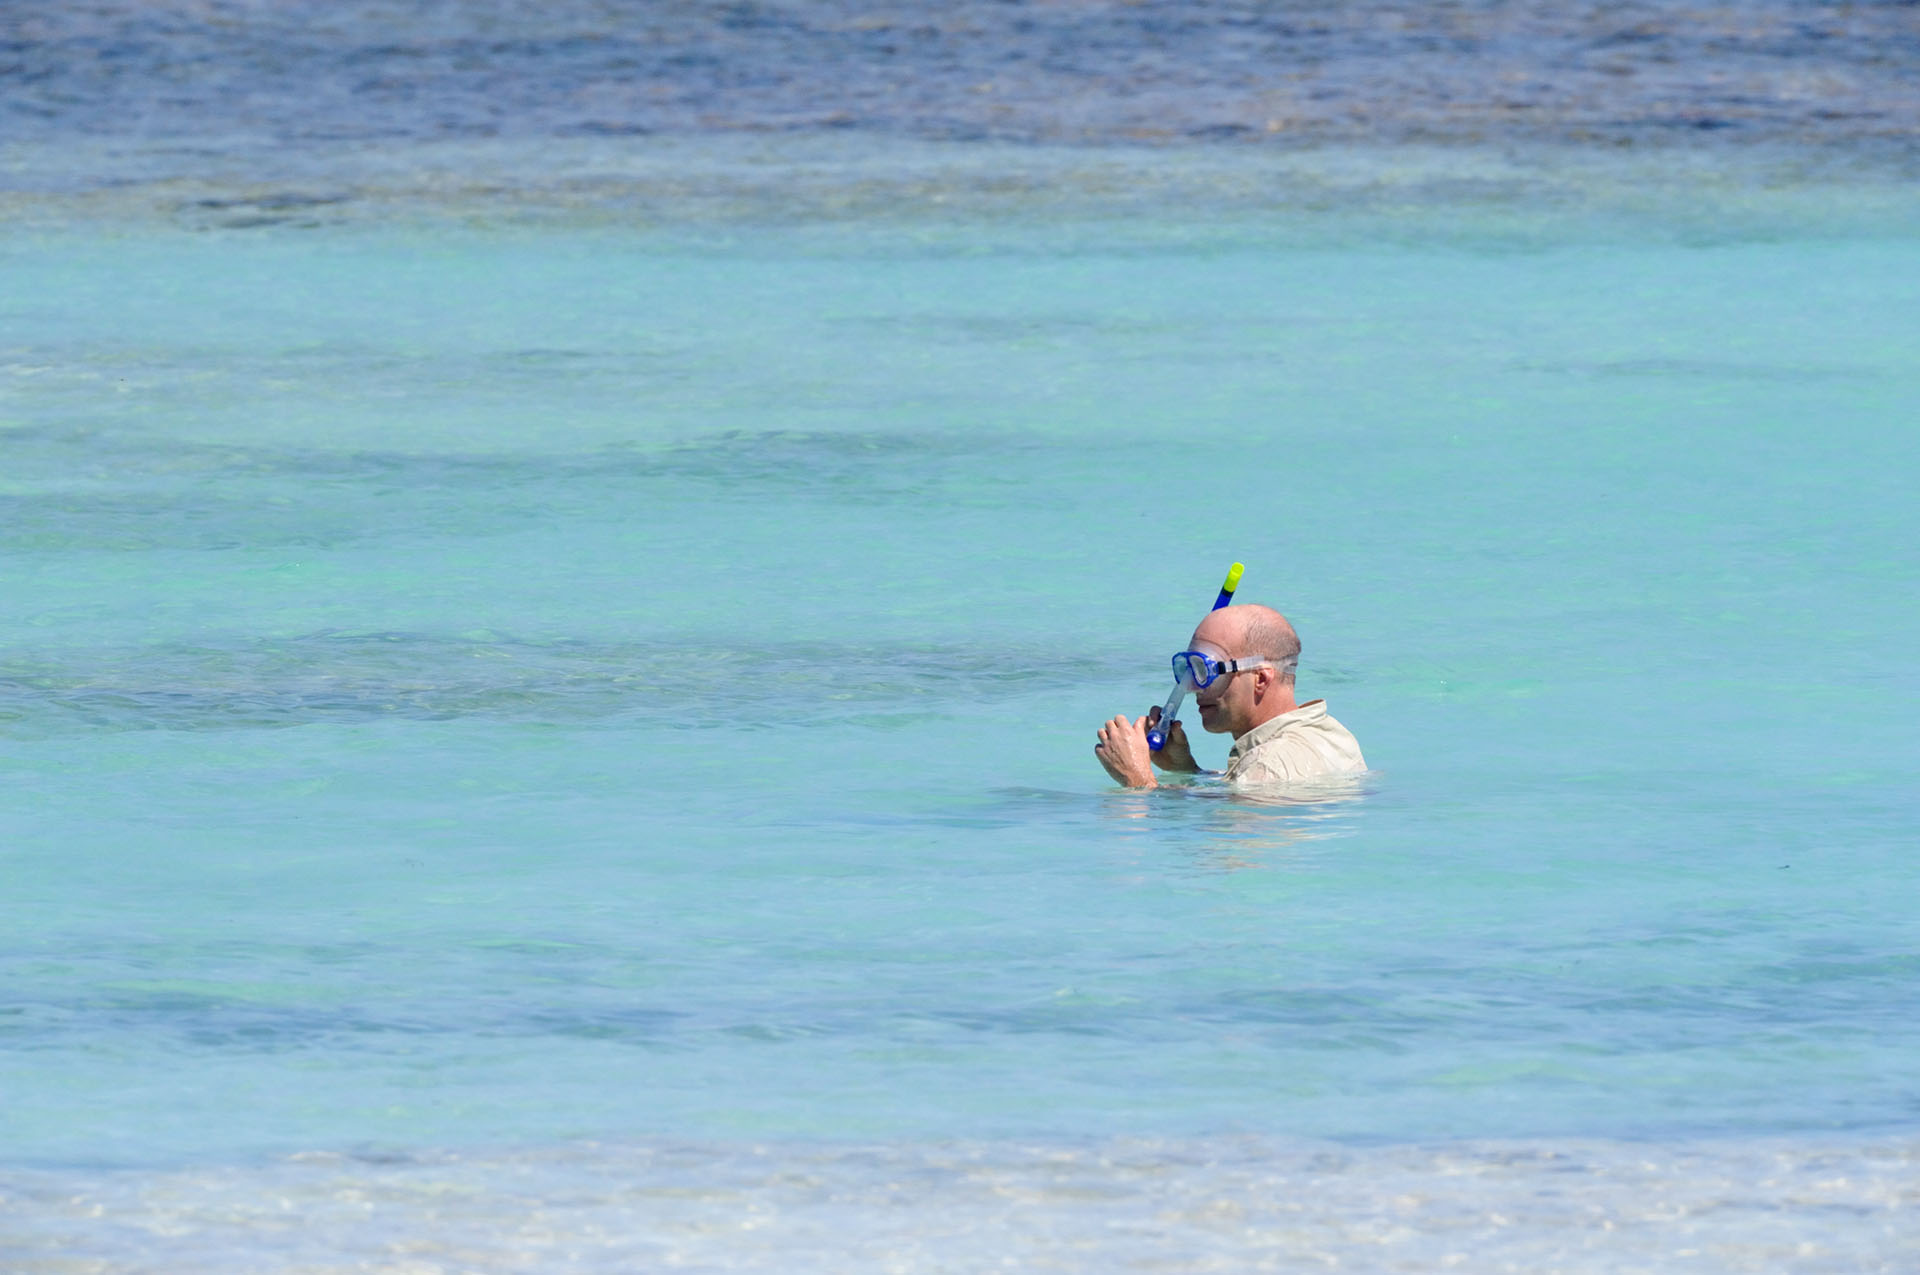 In shallow water for the coast of D'Arros island, Seychelles islands.